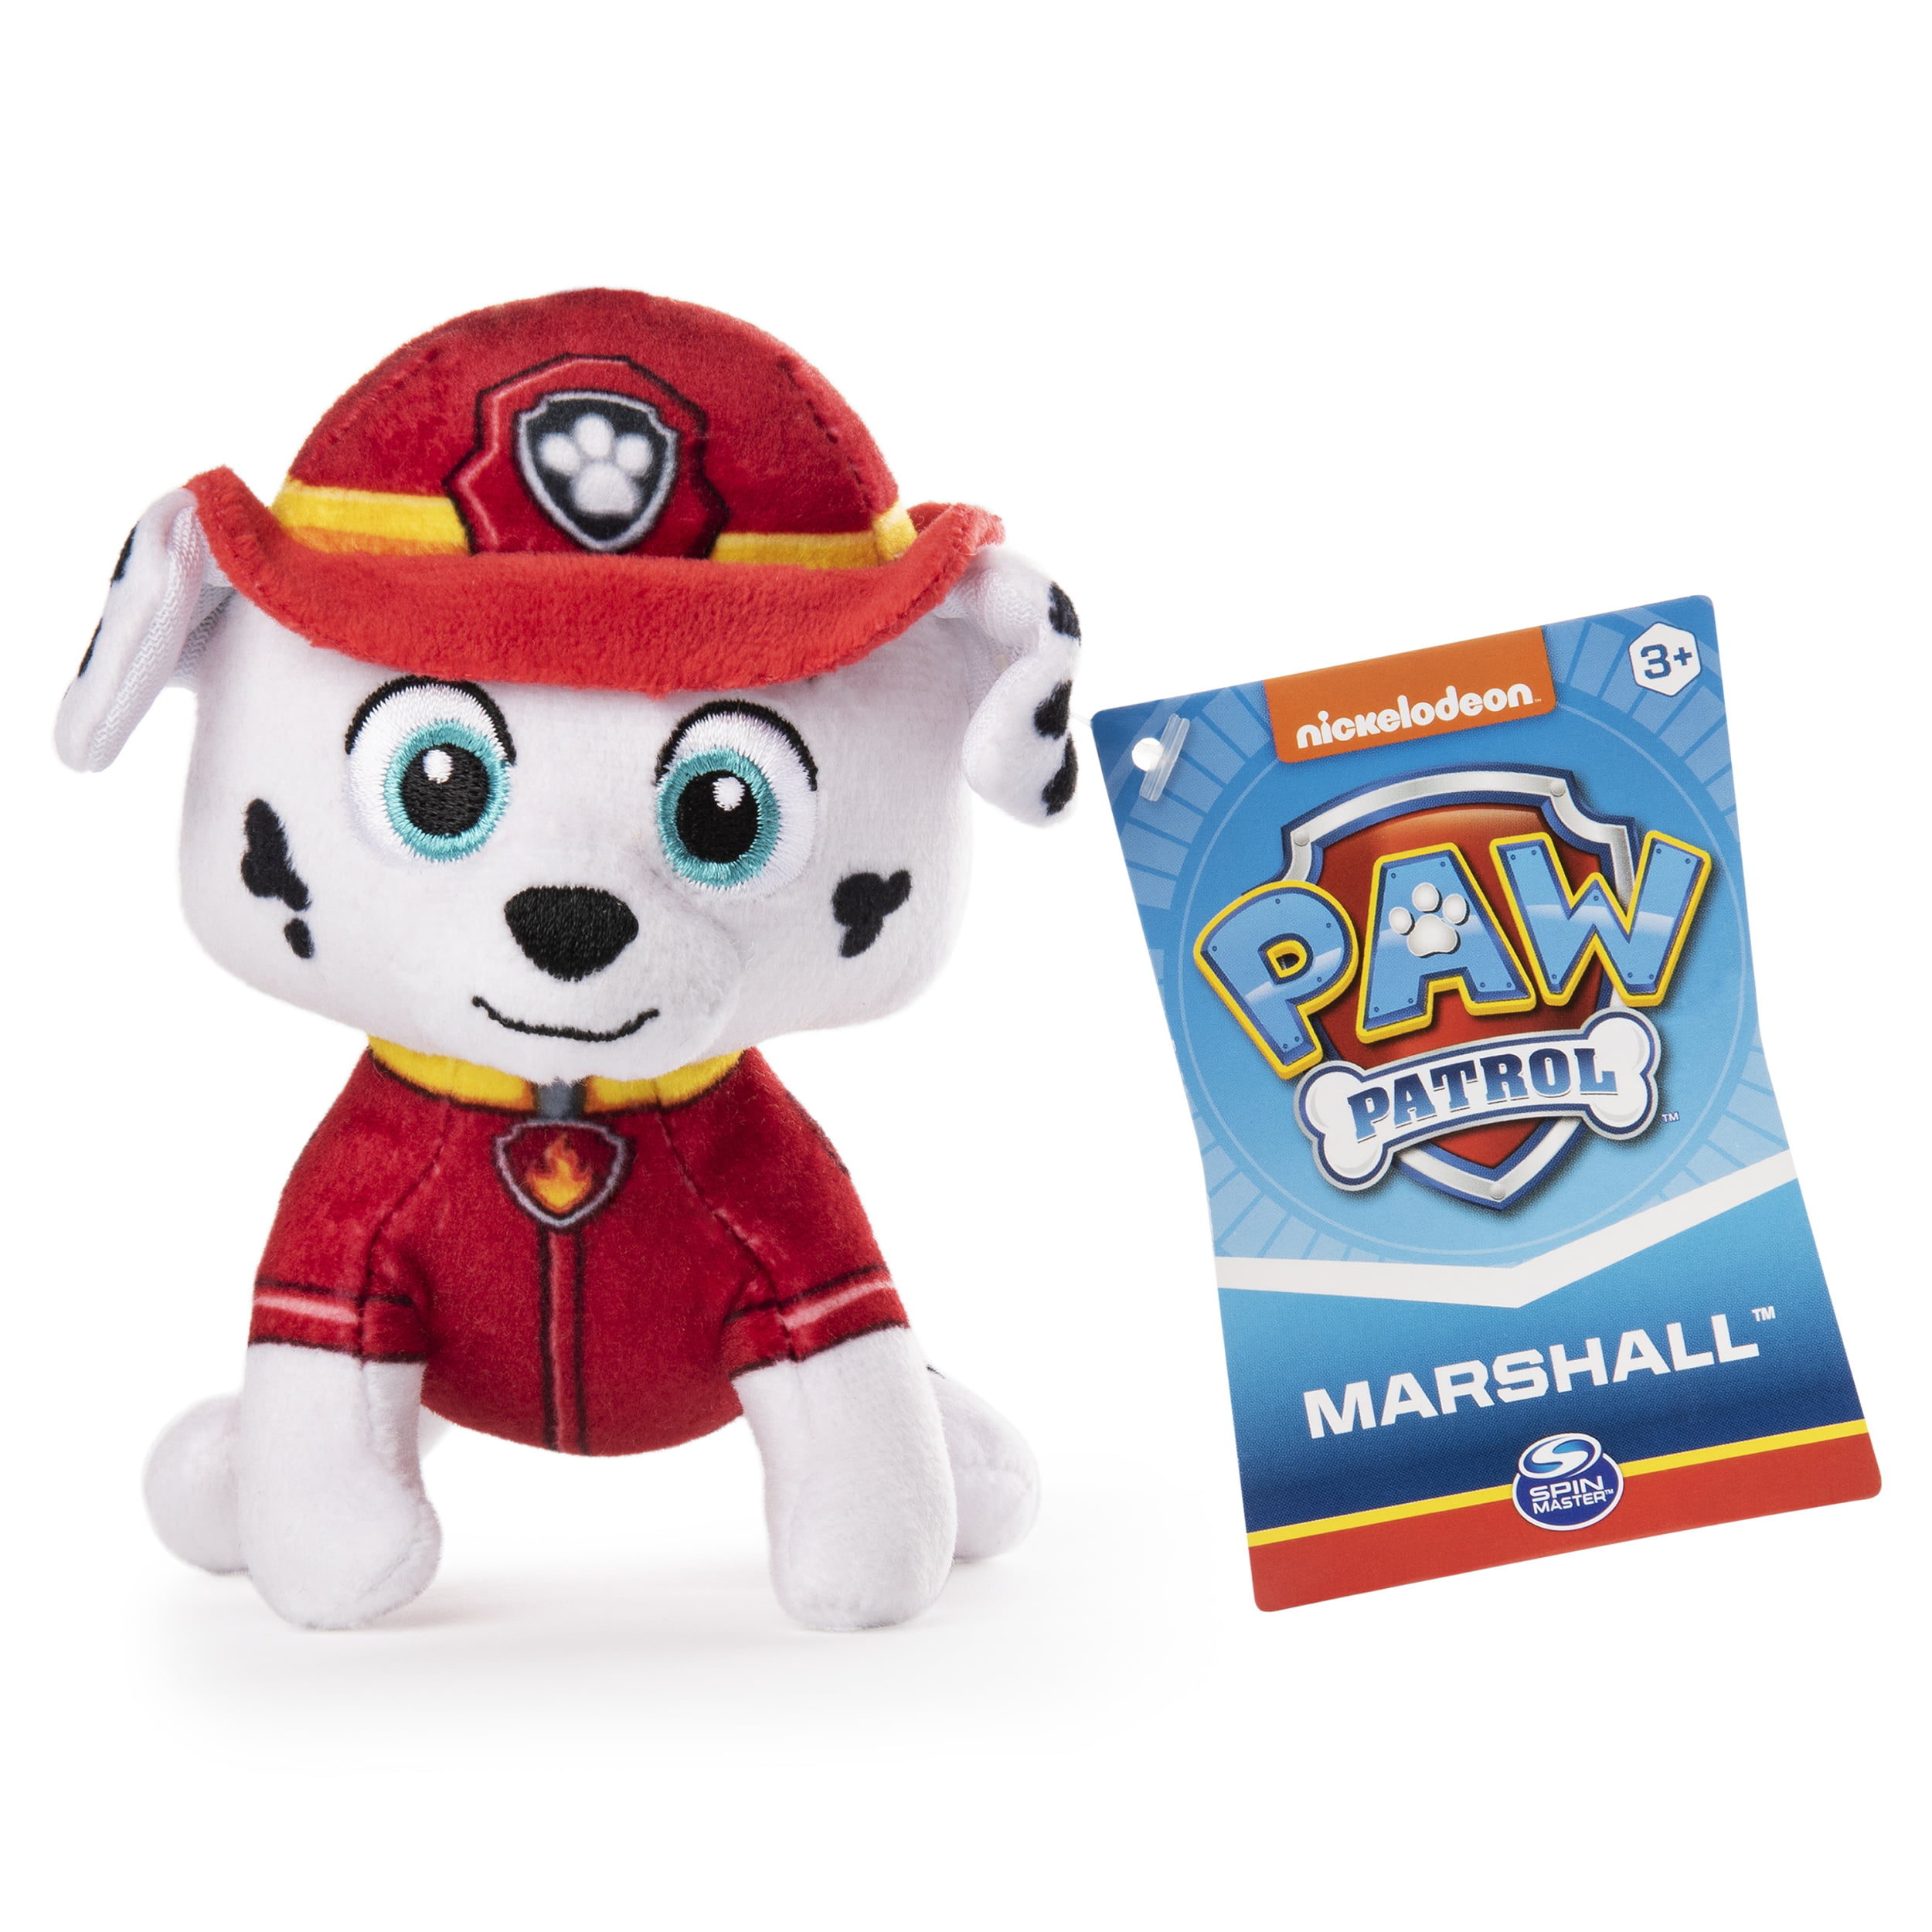 Buy Paw Patrol 5 Inch Mashall Mini Plush Pup For Ages 3 And Up Online